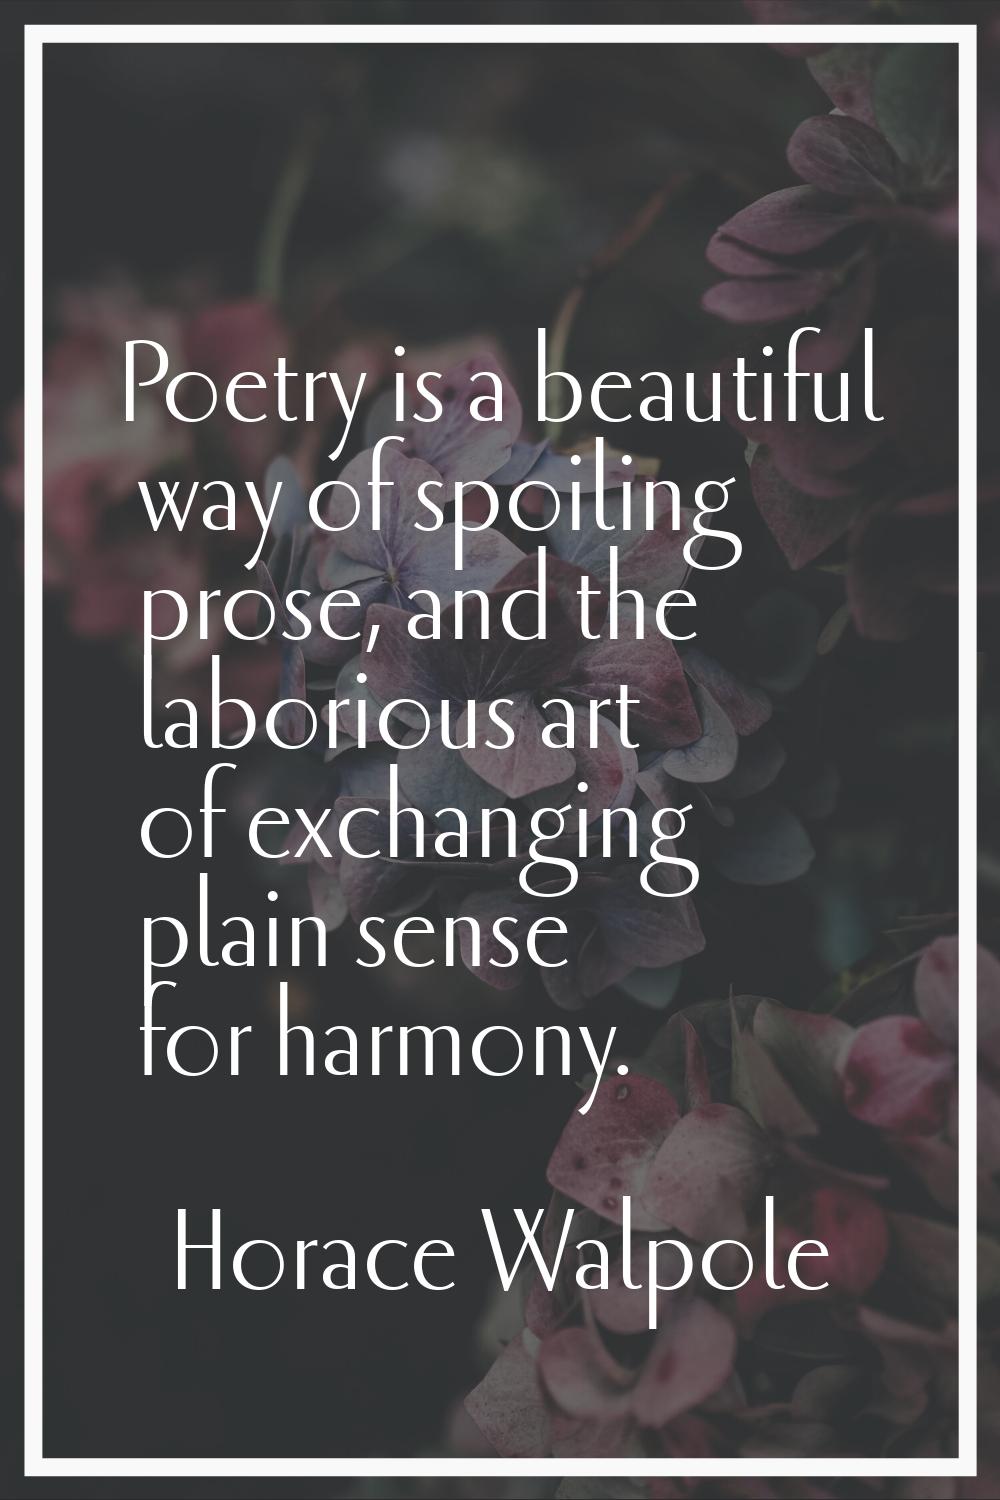 Poetry is a beautiful way of spoiling prose, and the laborious art of exchanging plain sense for ha